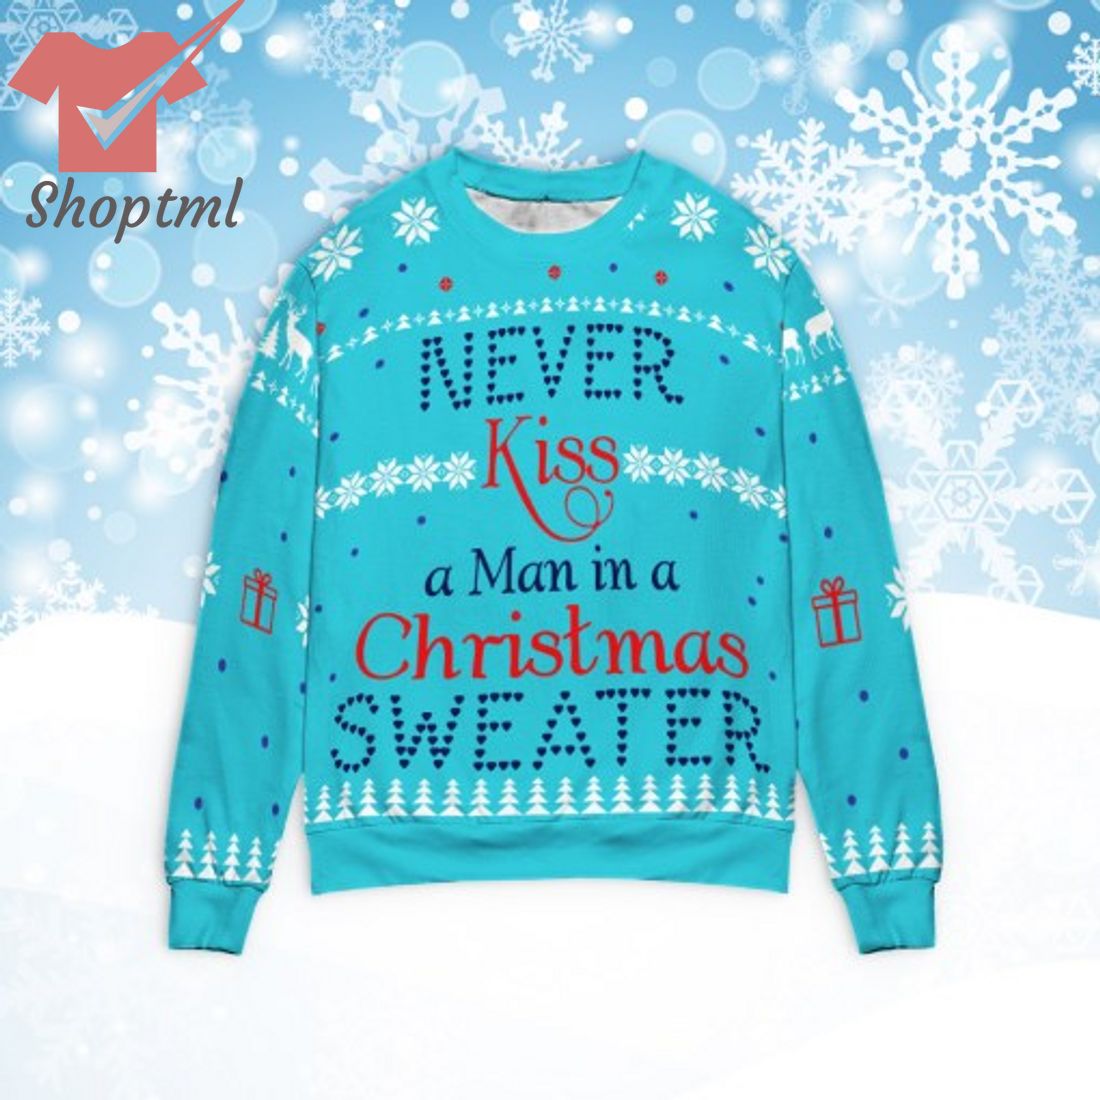 Never kiss a man in a Christmas sweater